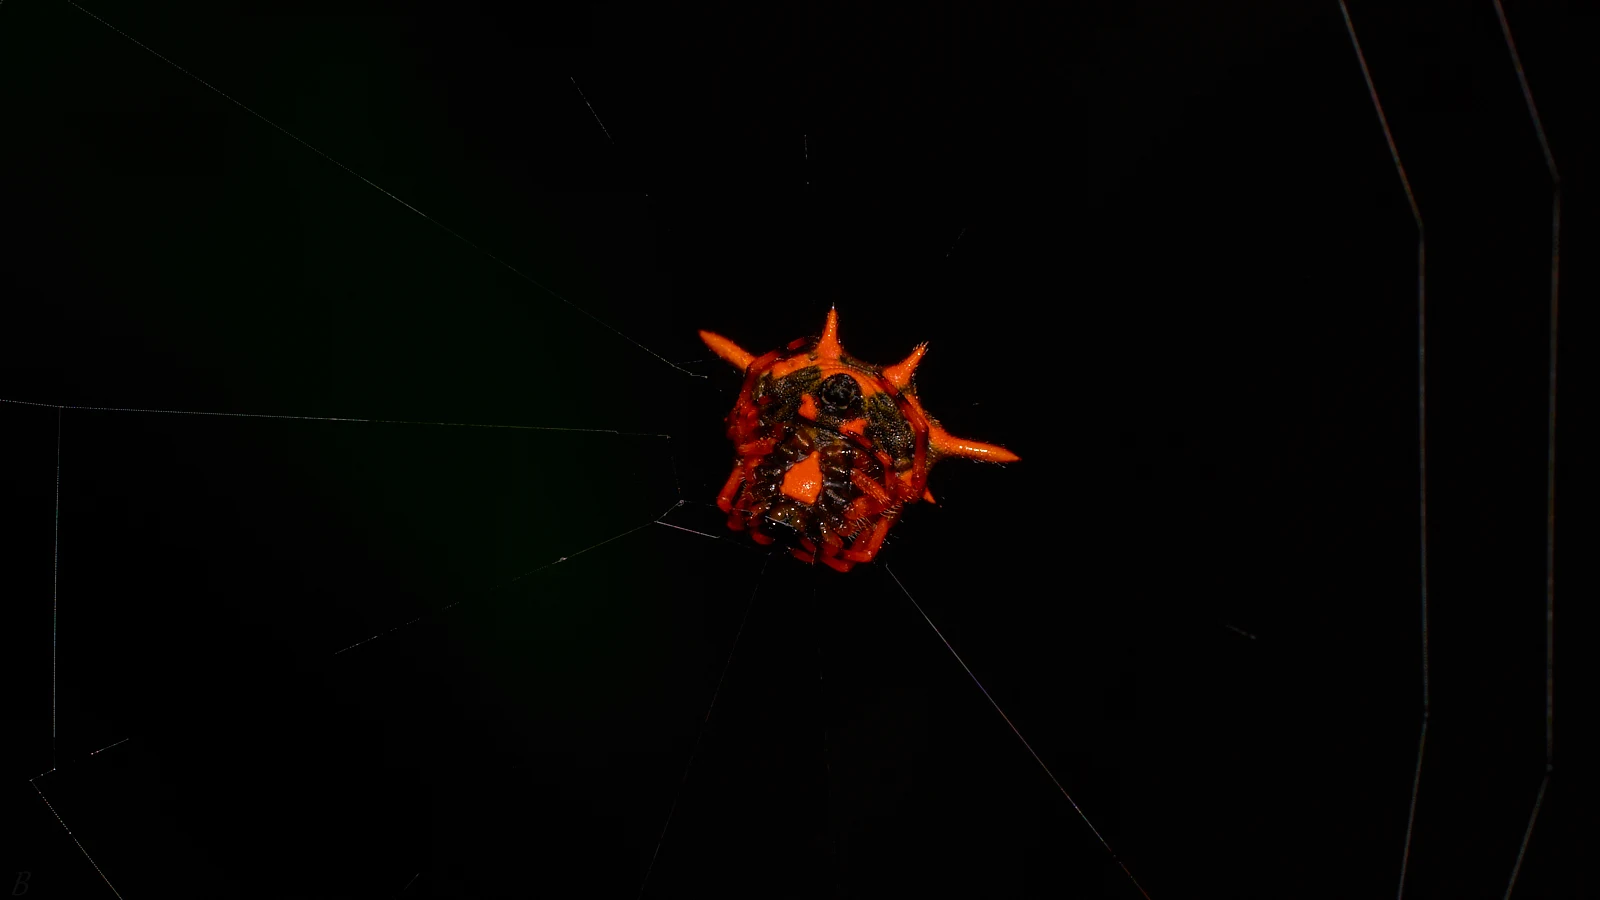 I'm sure that this spider inspired Star Wars